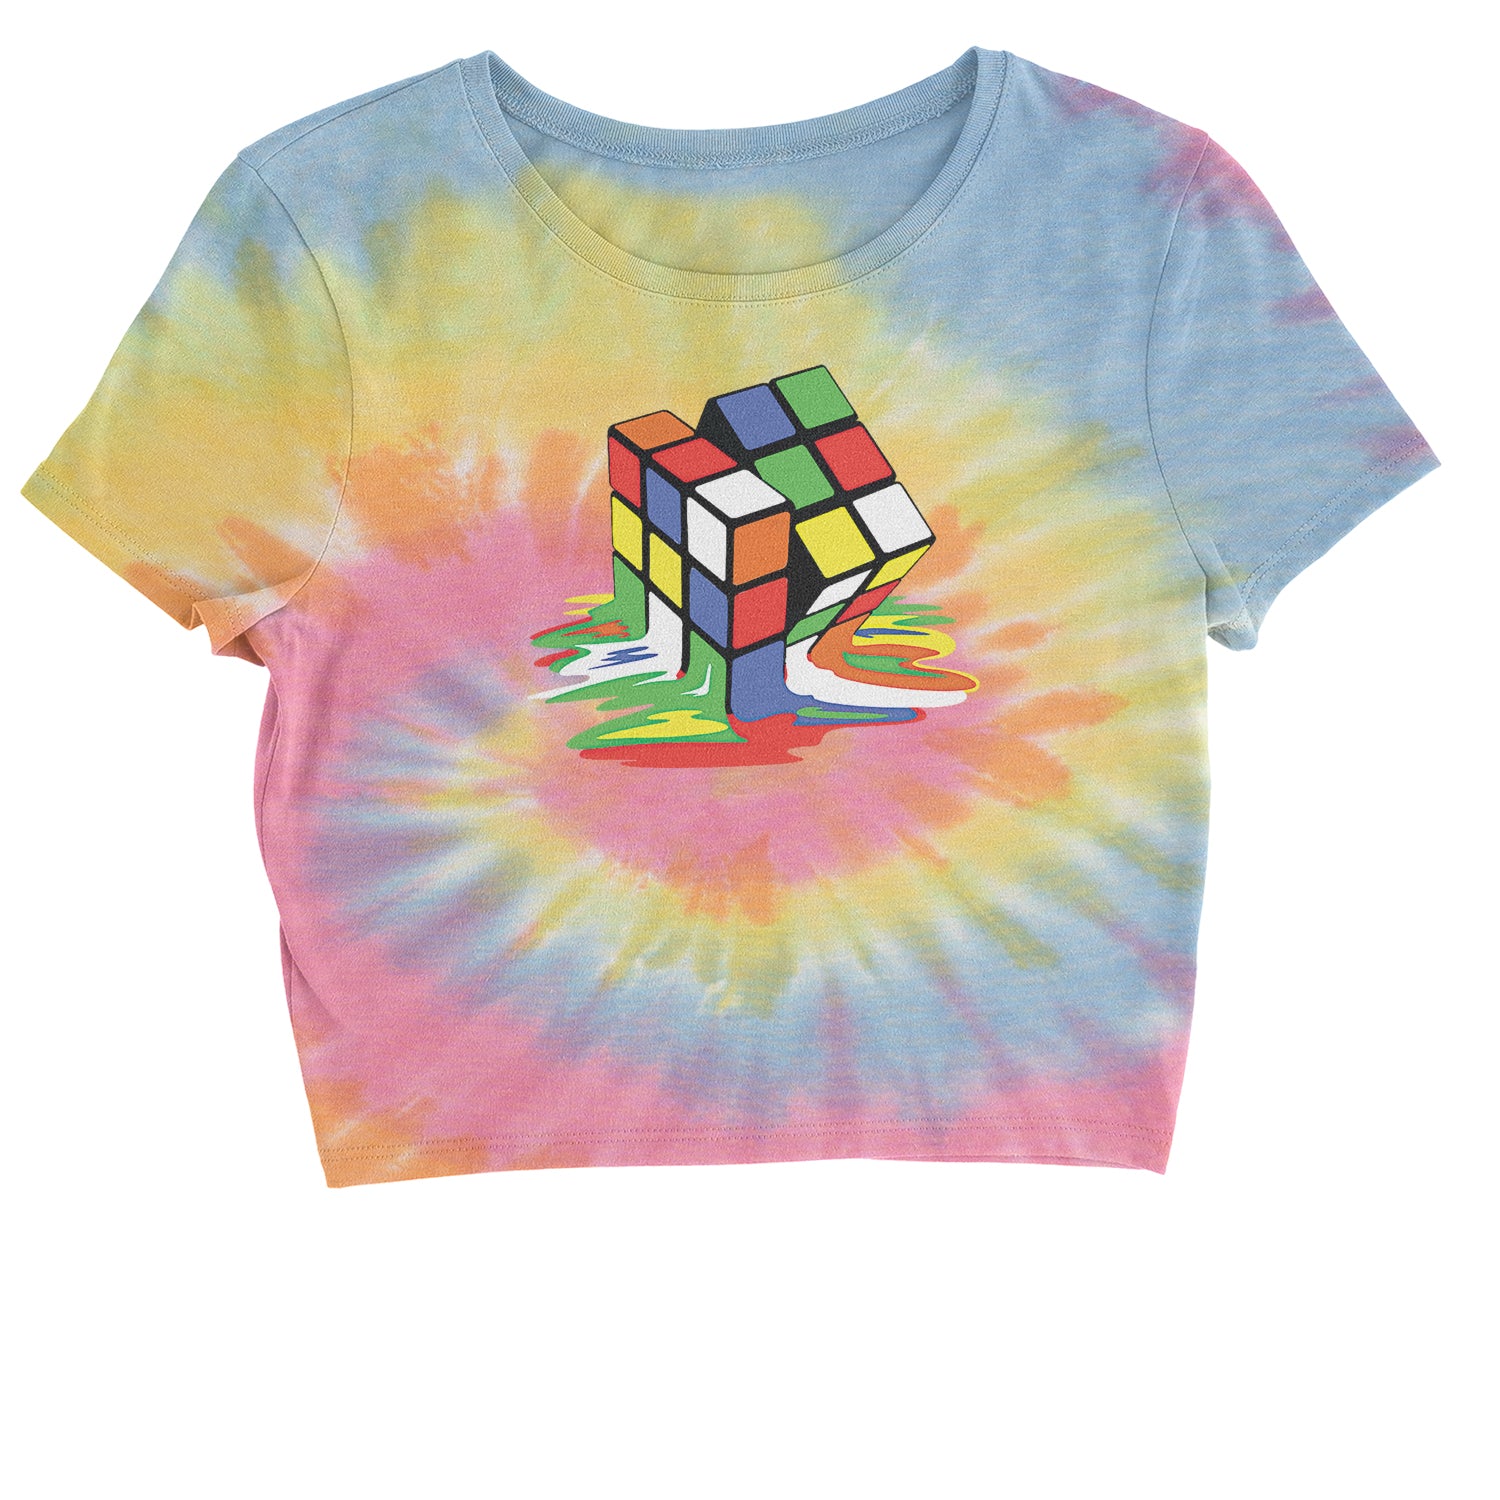 Melting Multi-Colored Cube Cropped T-Shirt gamer, gaming, nerd, shirt by Expression Tees